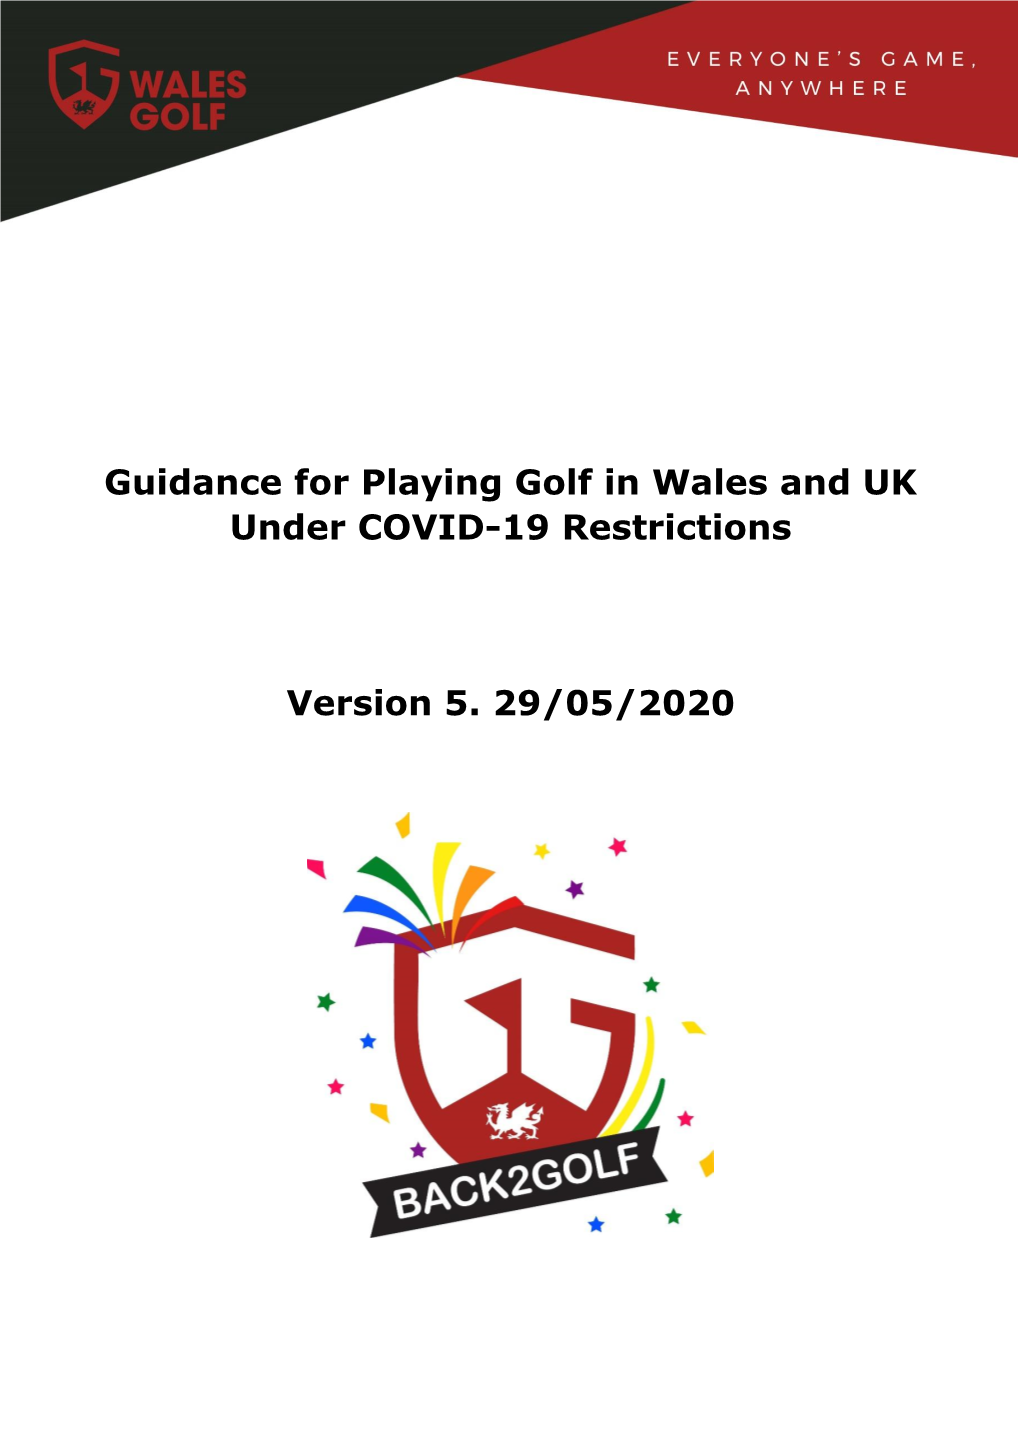 Guidance for Playing Golf in Wales and UK Under COVID-19 Restrictions